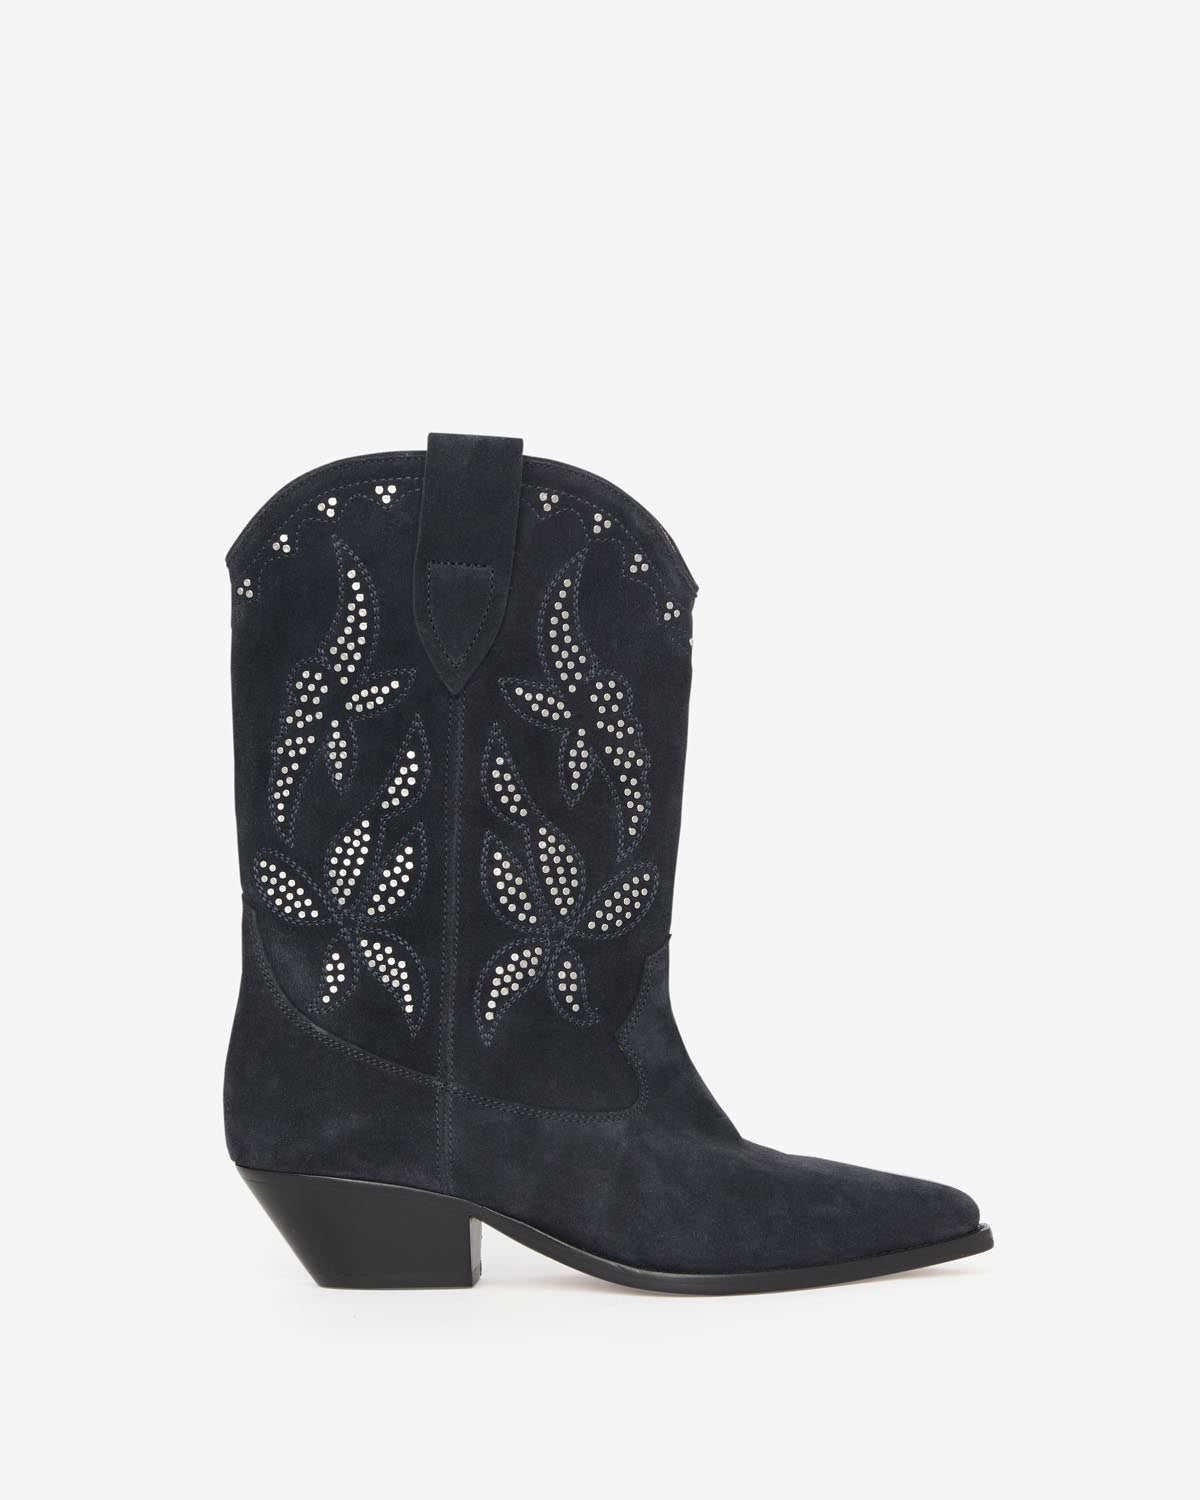 Boots duerto Woman Faded black-silver 5